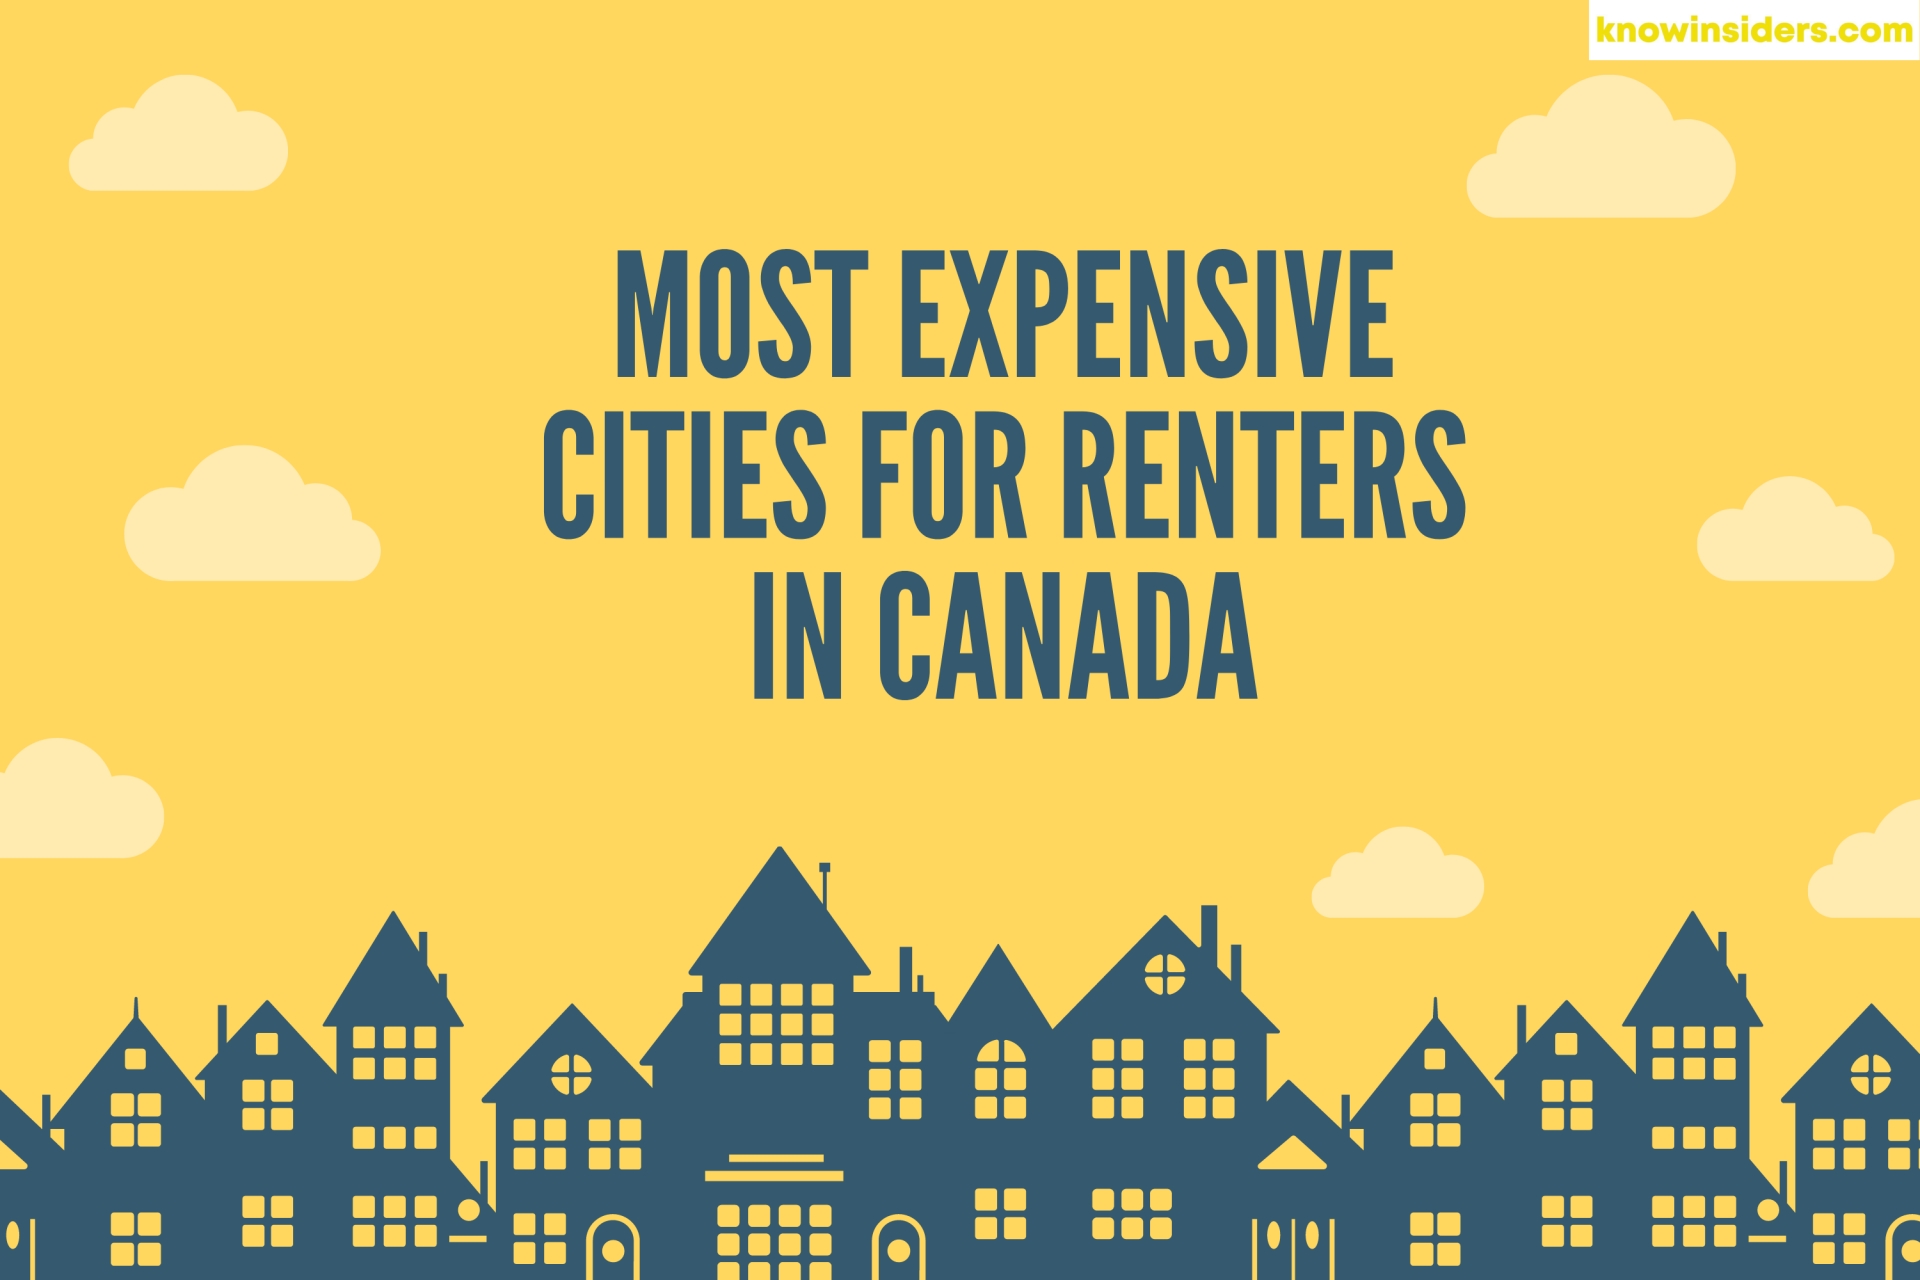 5 Most Expensive Cities For Renters In Canada